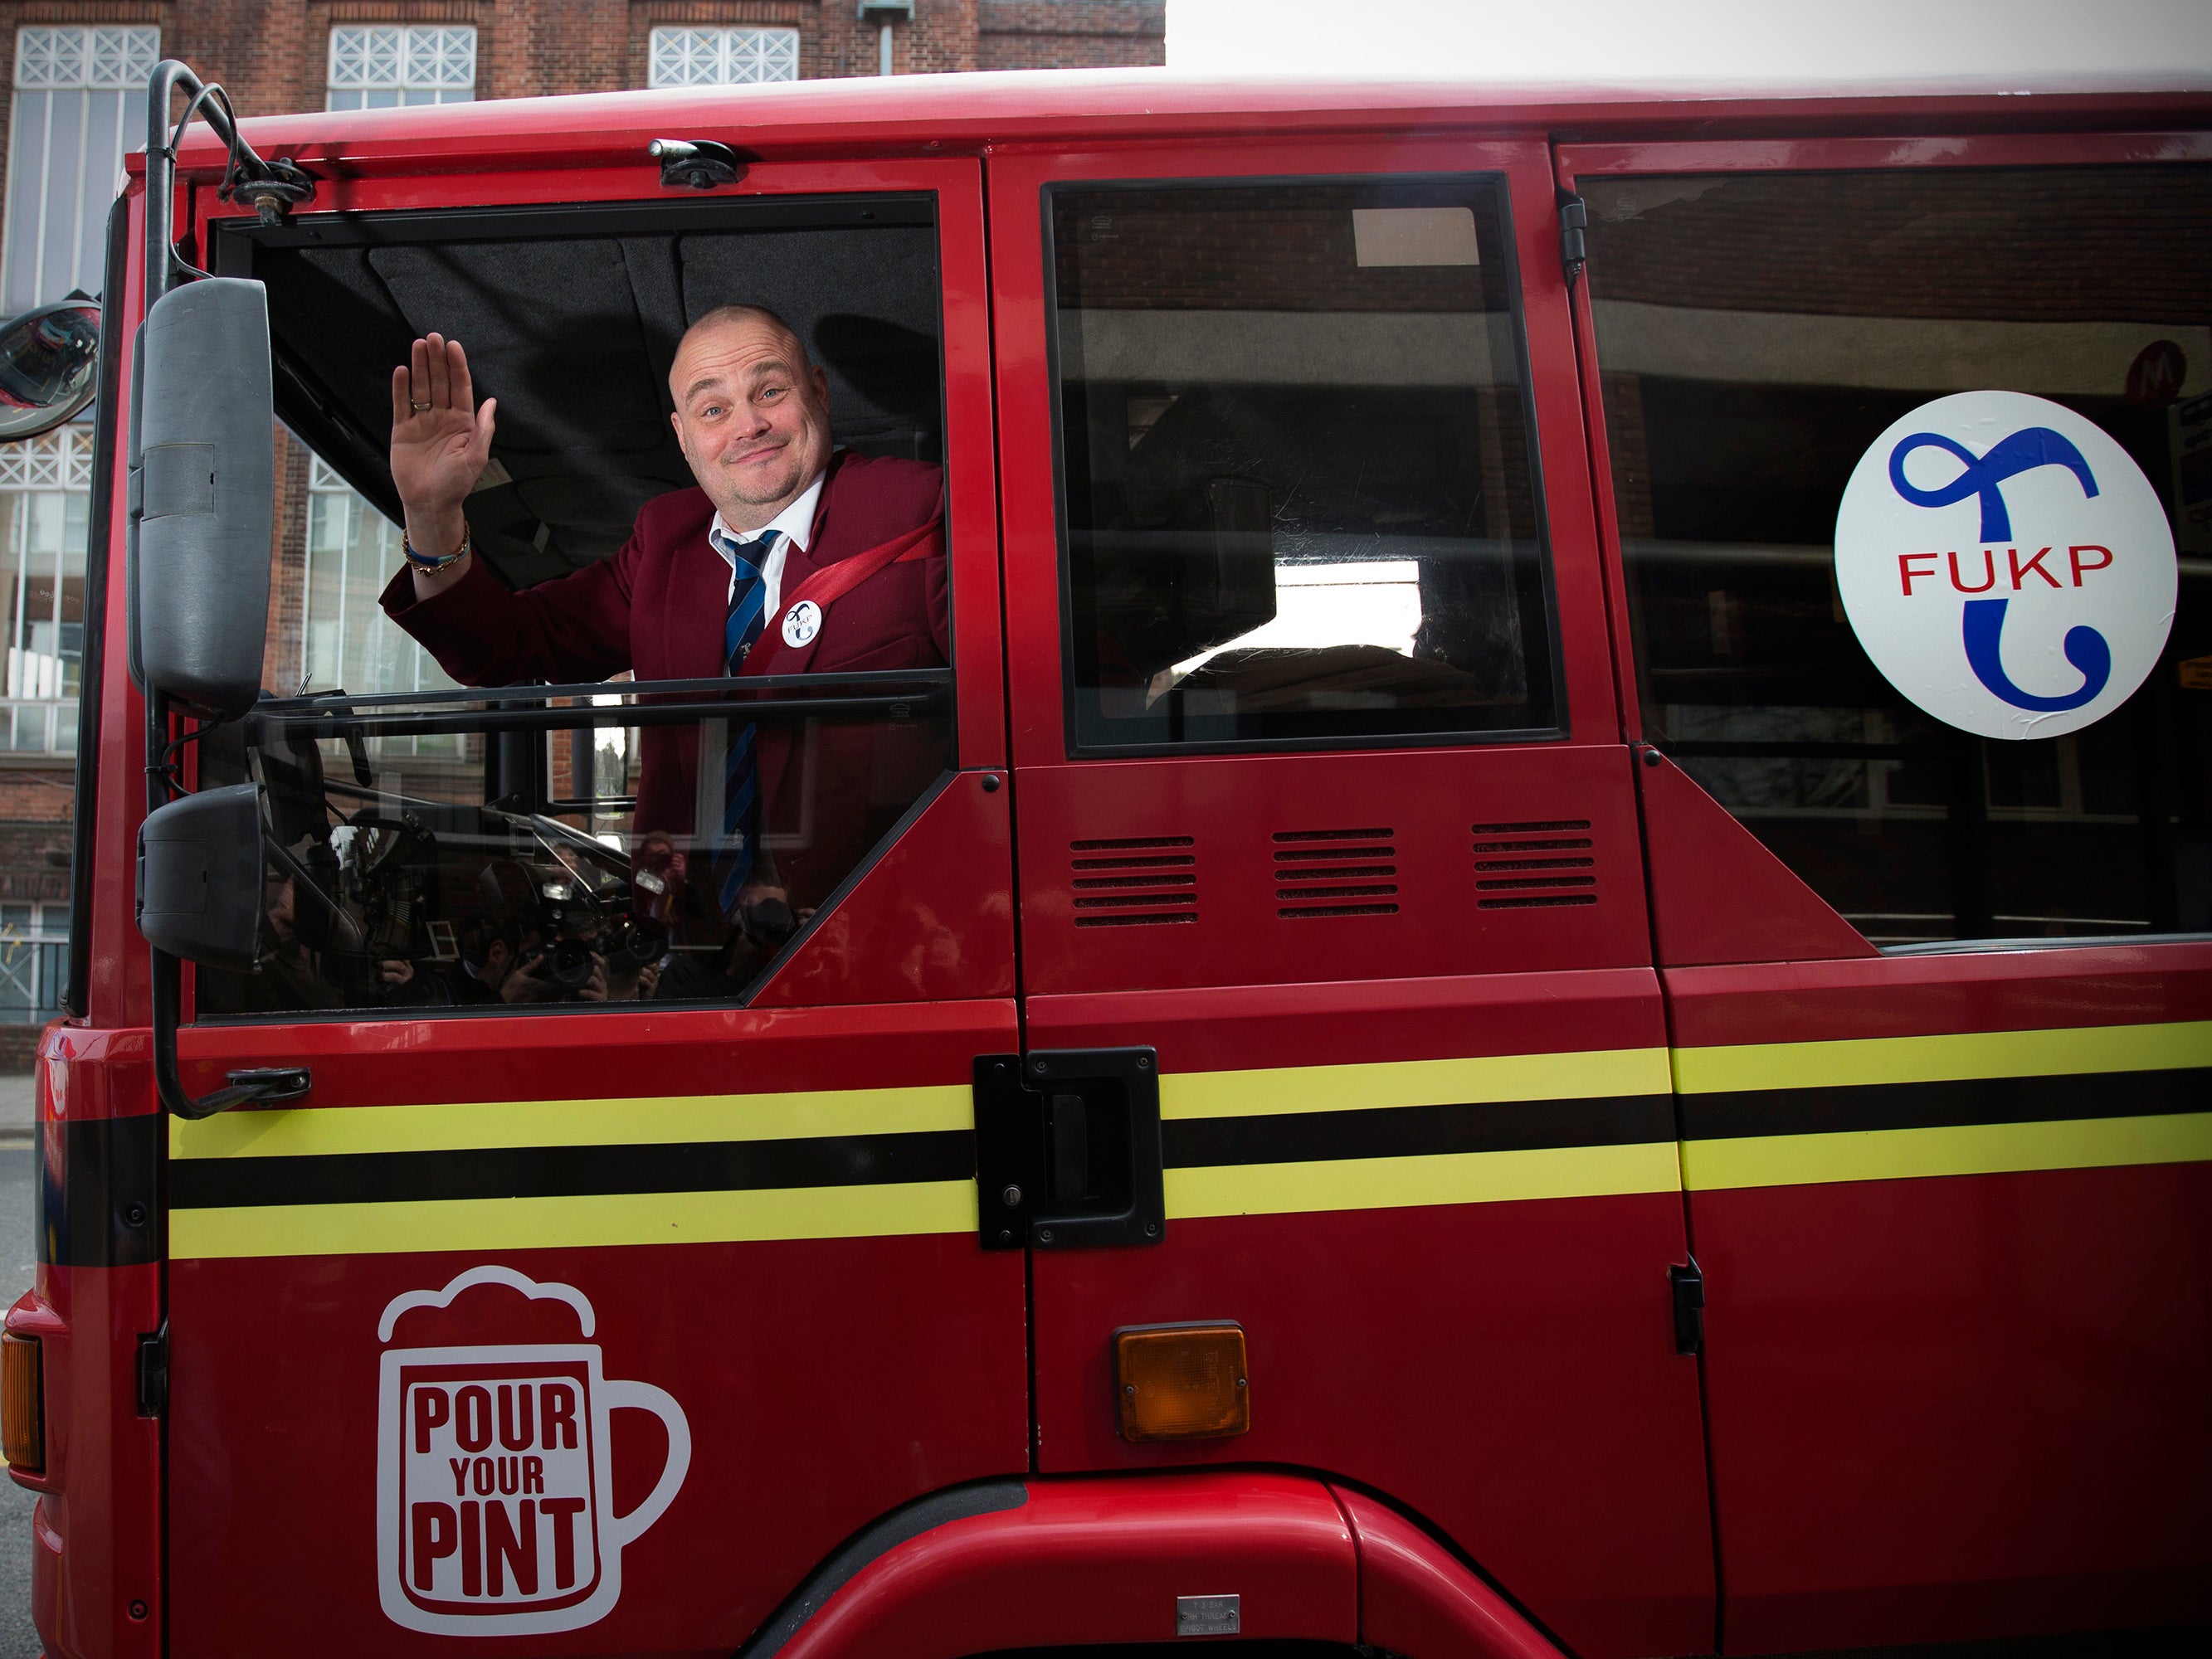 Al Murray launching the FUKP campaign in South Thanet, Kent